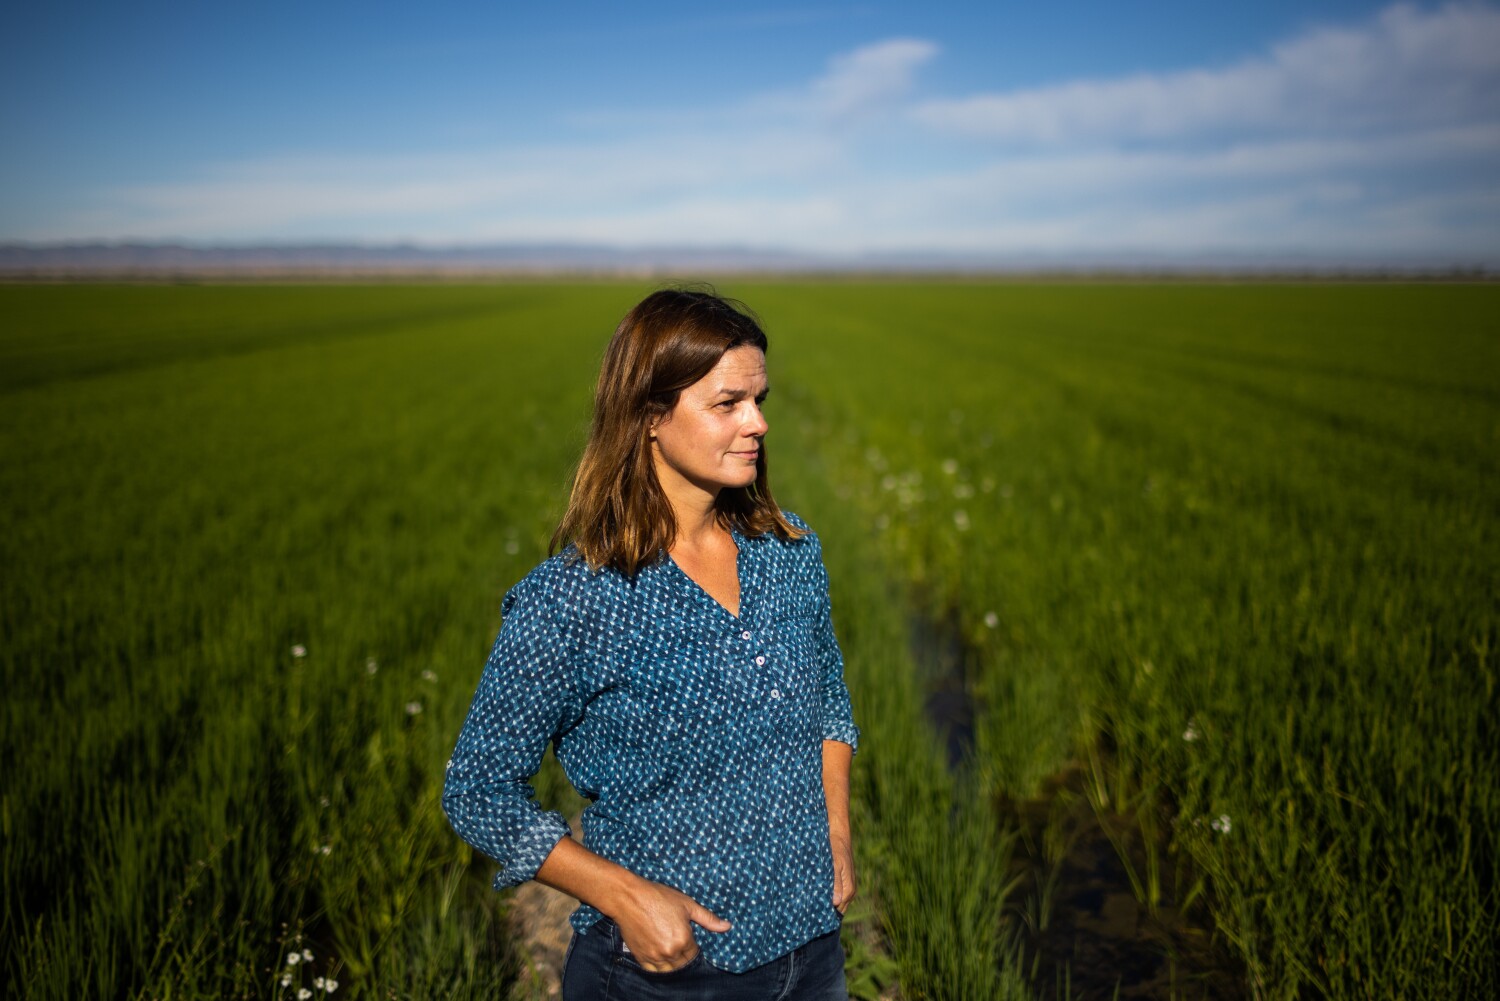 Many California farmers have water cut off, but a lucky few are immune to drought rules